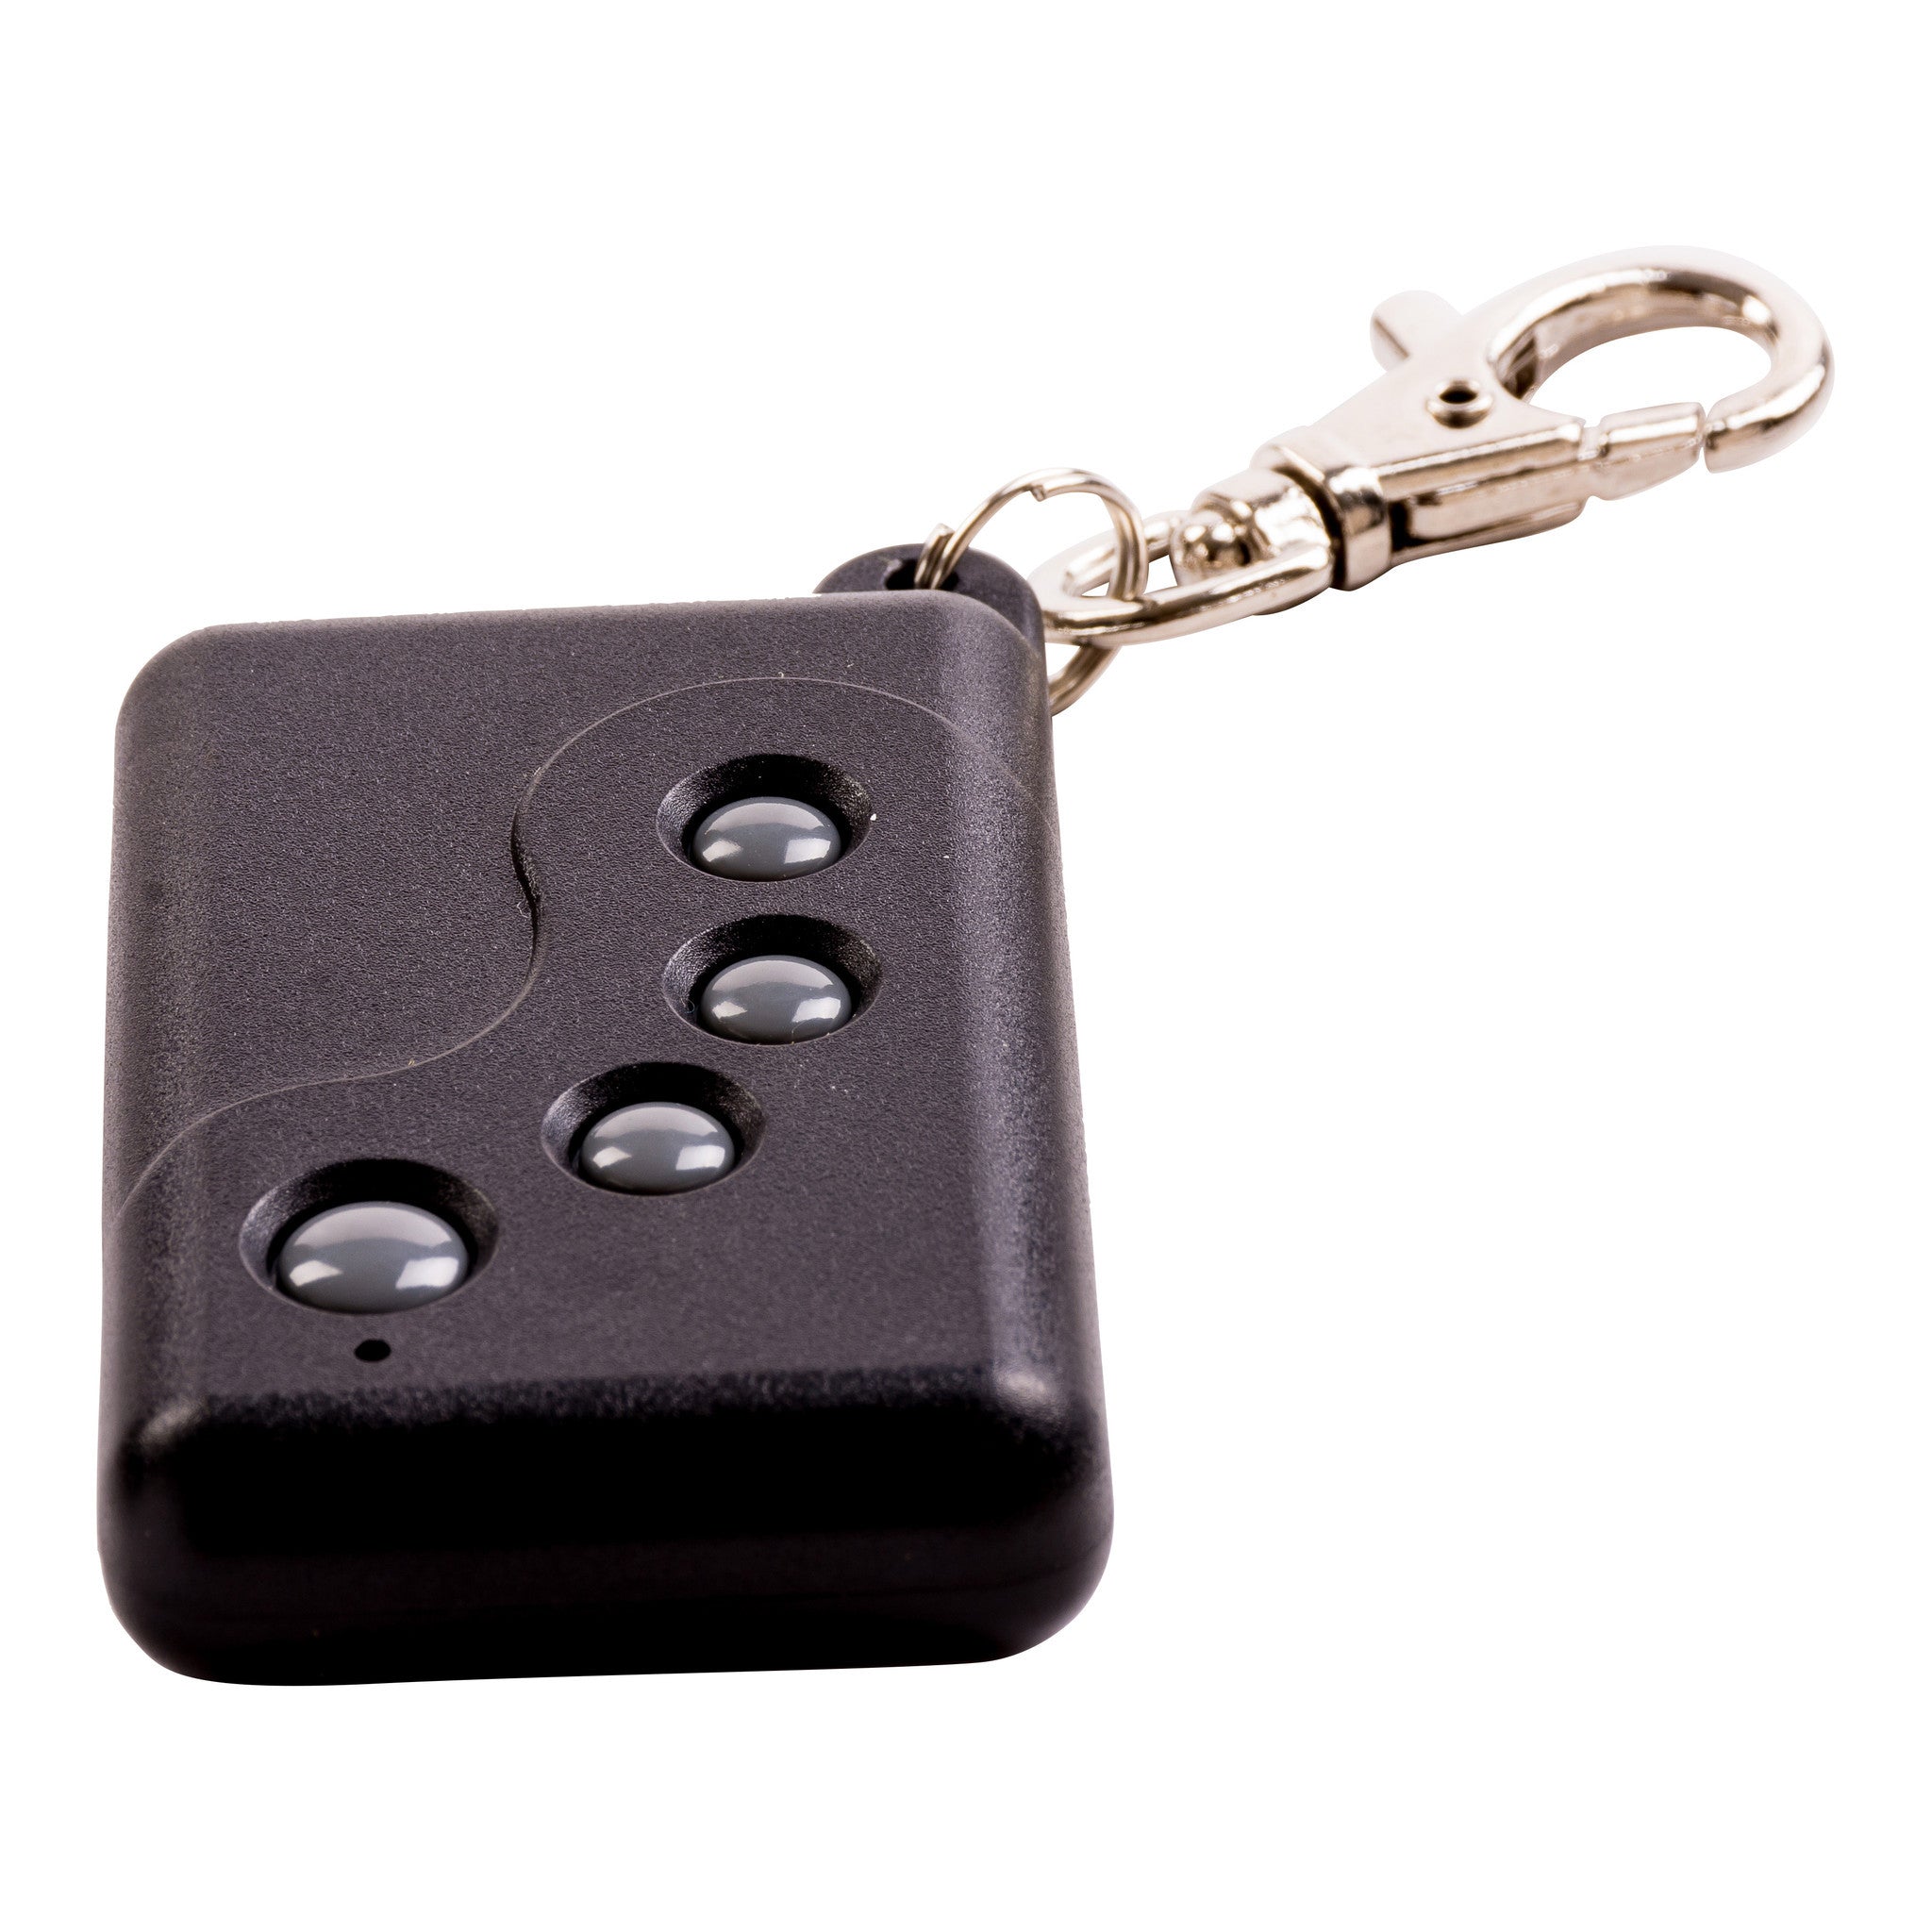 Four Channel Remote Control Fob - RC1 Product Image